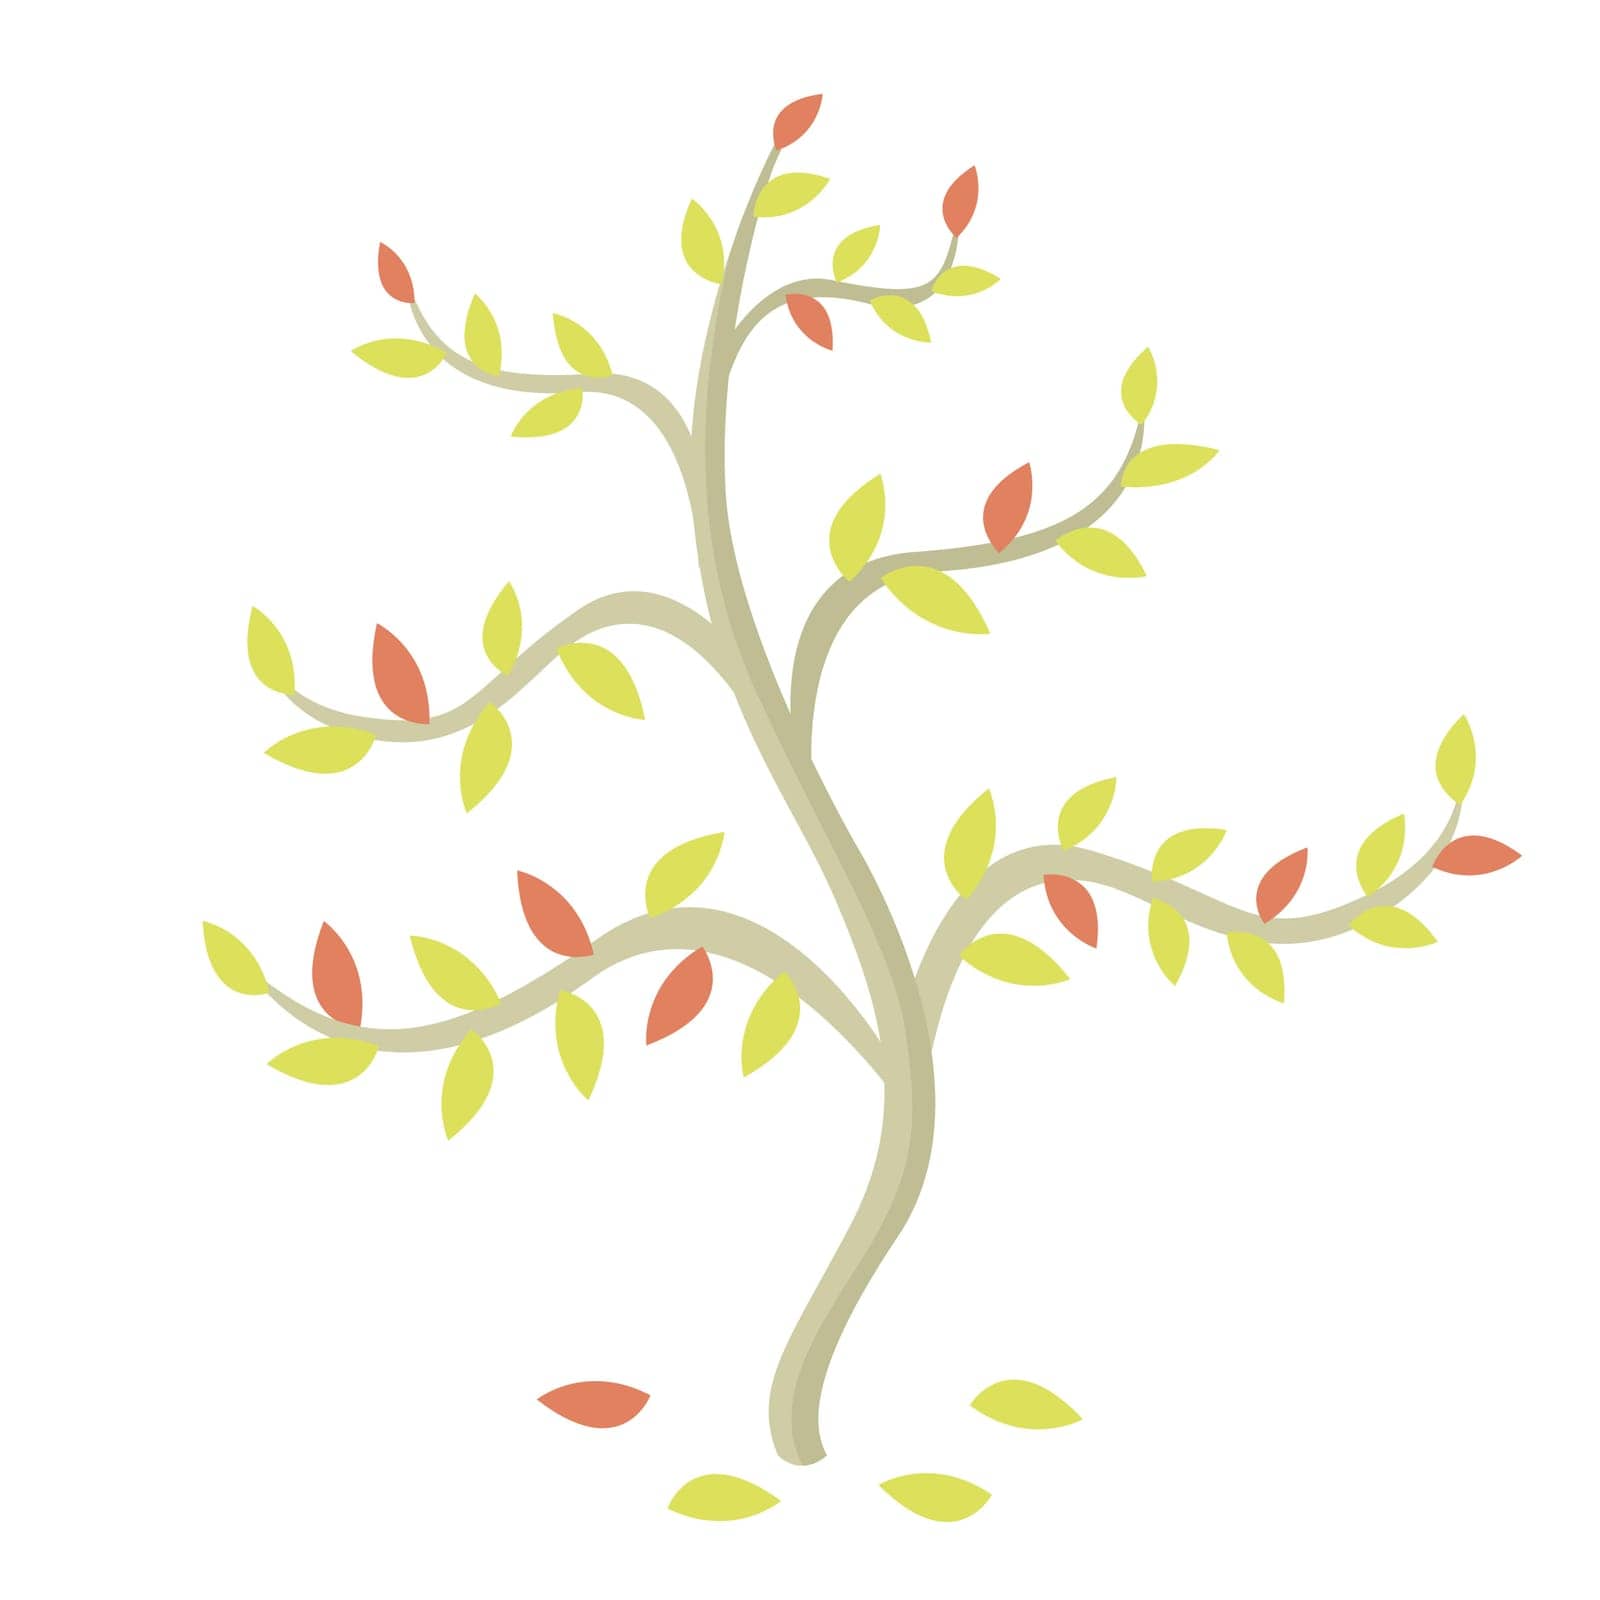 Minimalist flat fall tree with yellow and red little leaves on white background. Vector illustration